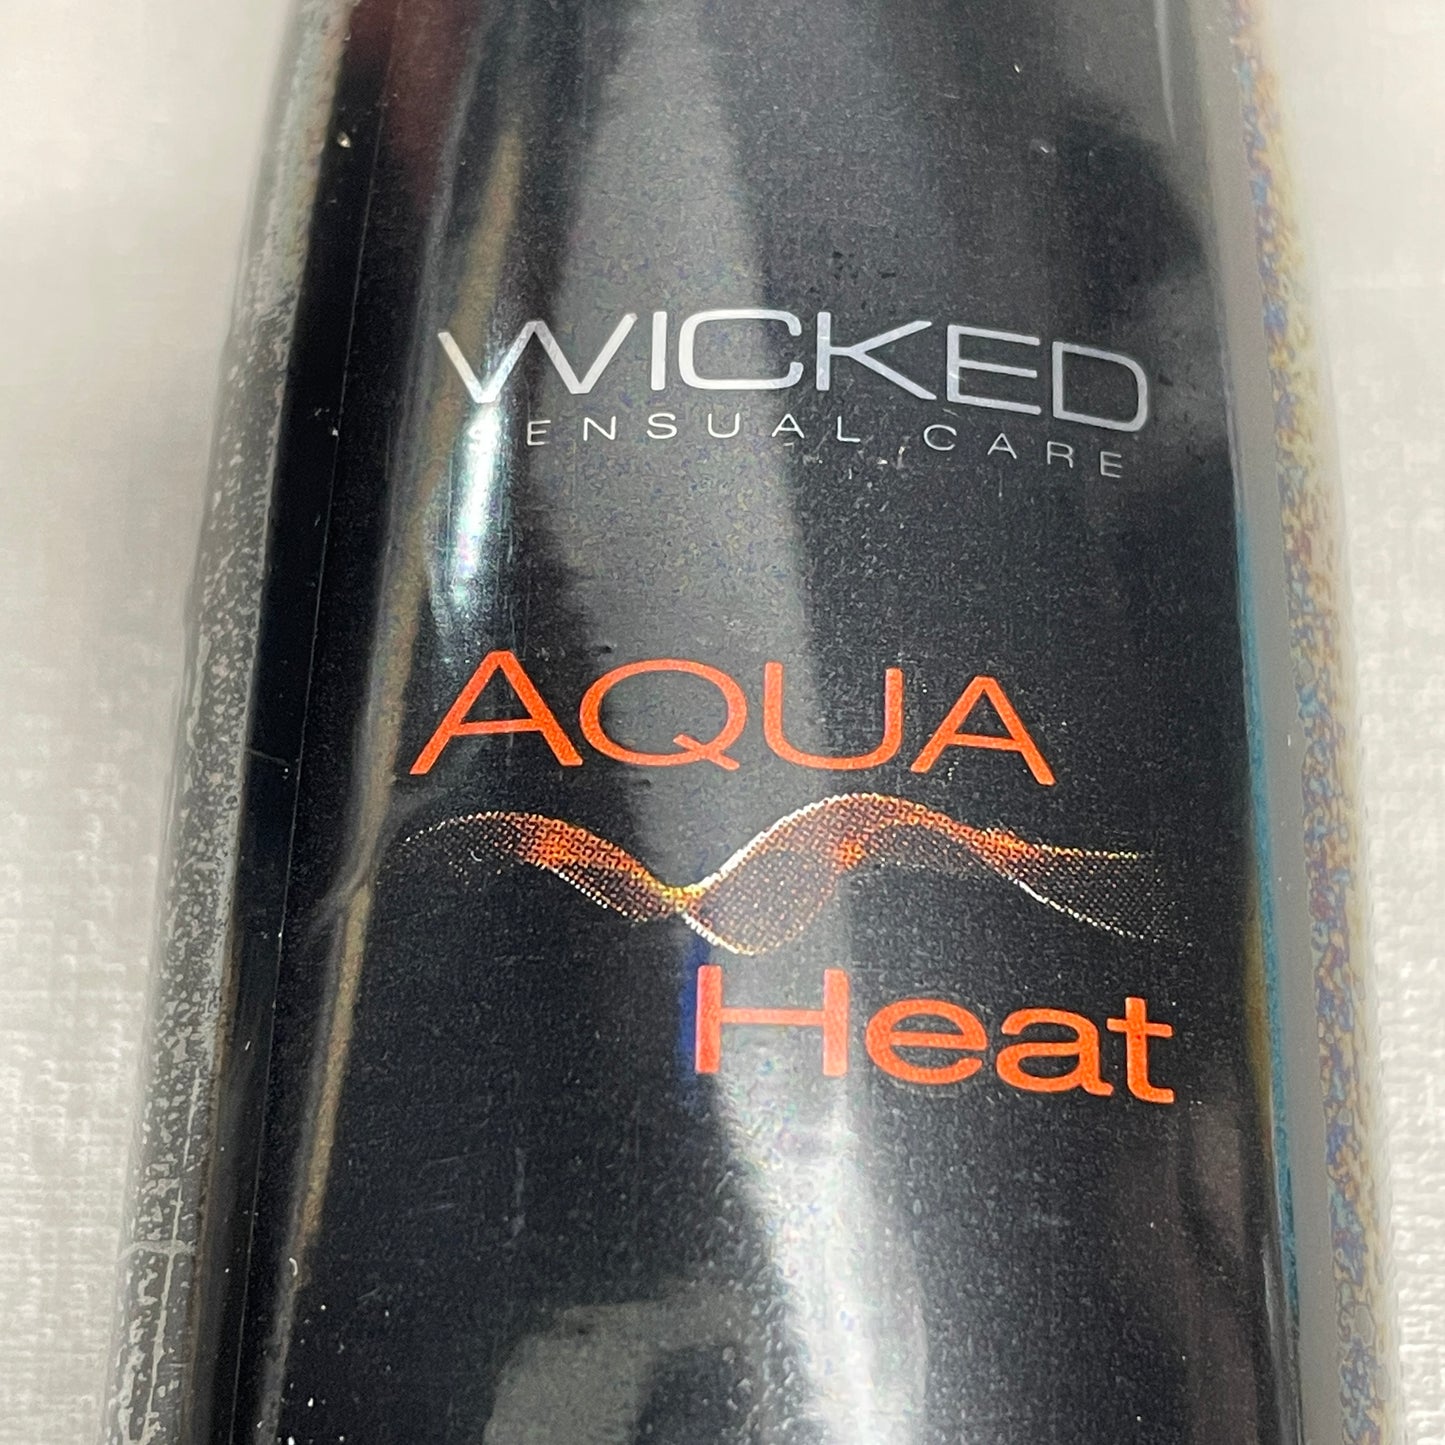 WICKED SENSUAL CARE Aqua Heat Water Based Warming Intimate Lubricant 2 oz Exp. 01/25 (New)